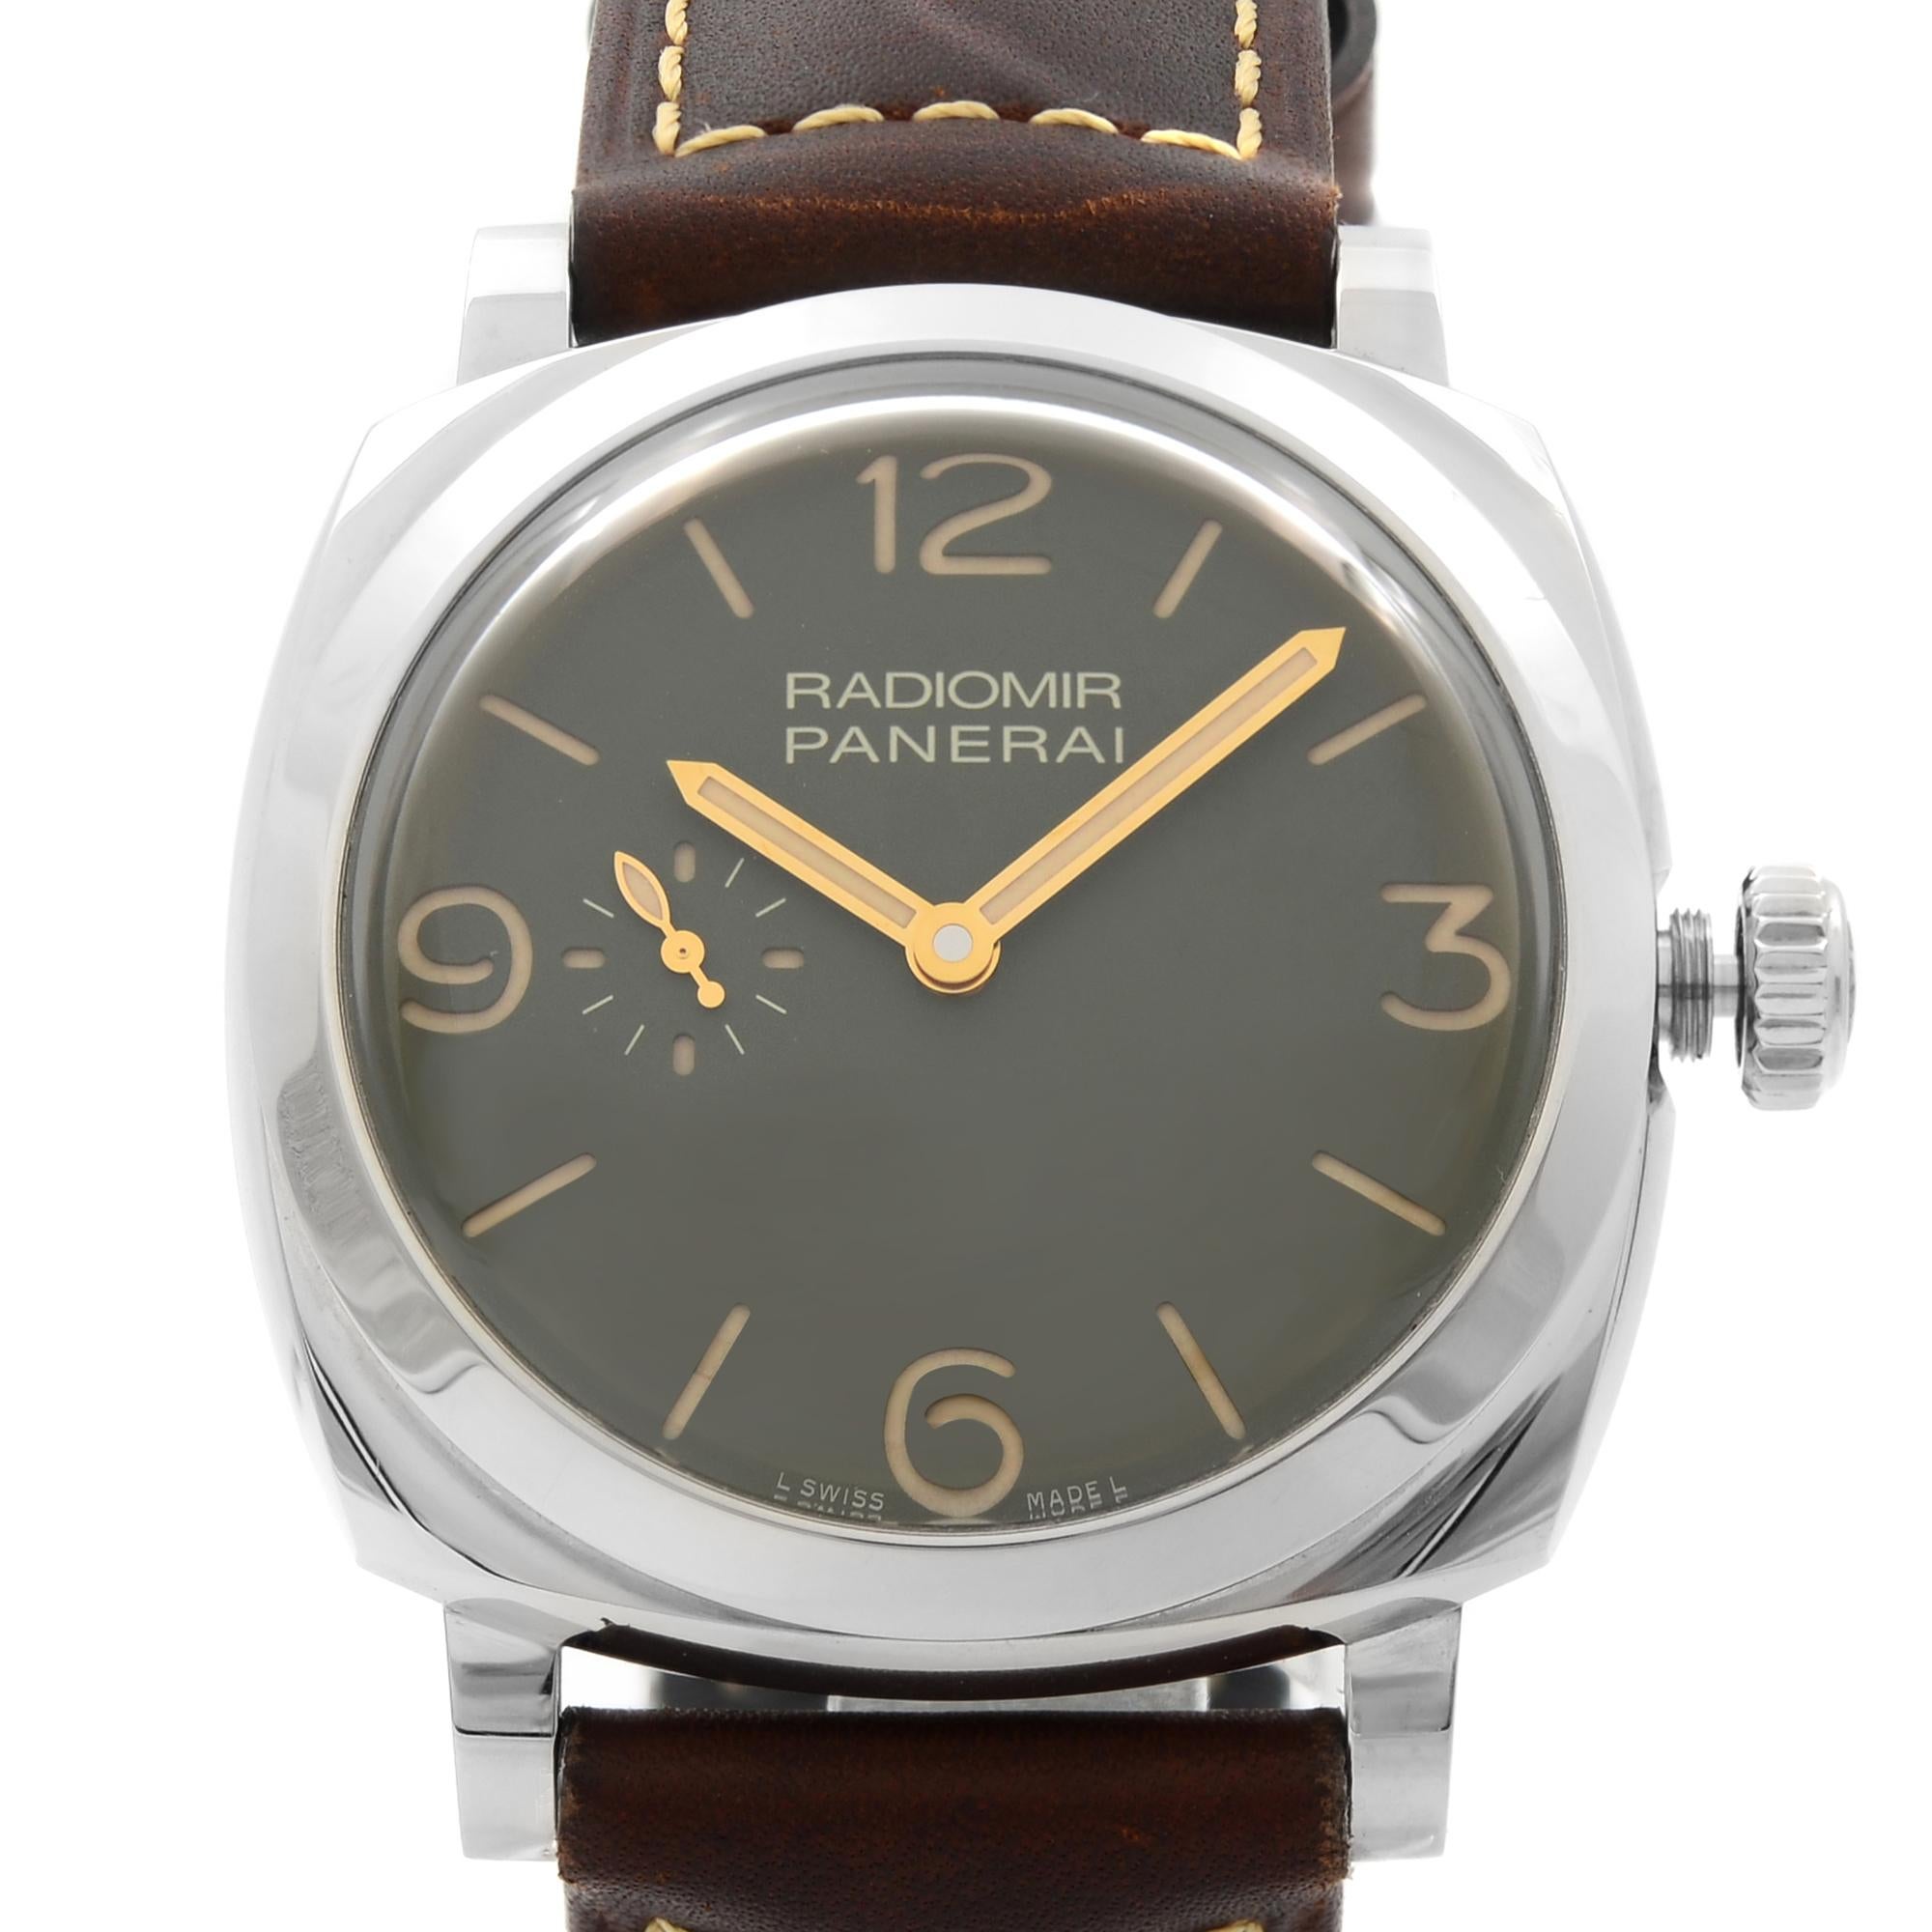 This pre-owned Panerai Radiomir PAM00995 is a beautiful men's timepiece that is powered by mechanical (automatic) movement which is cased in a stainless steel case. It has a round shape face, small seconds subdial dial and has hand sticks & numerals